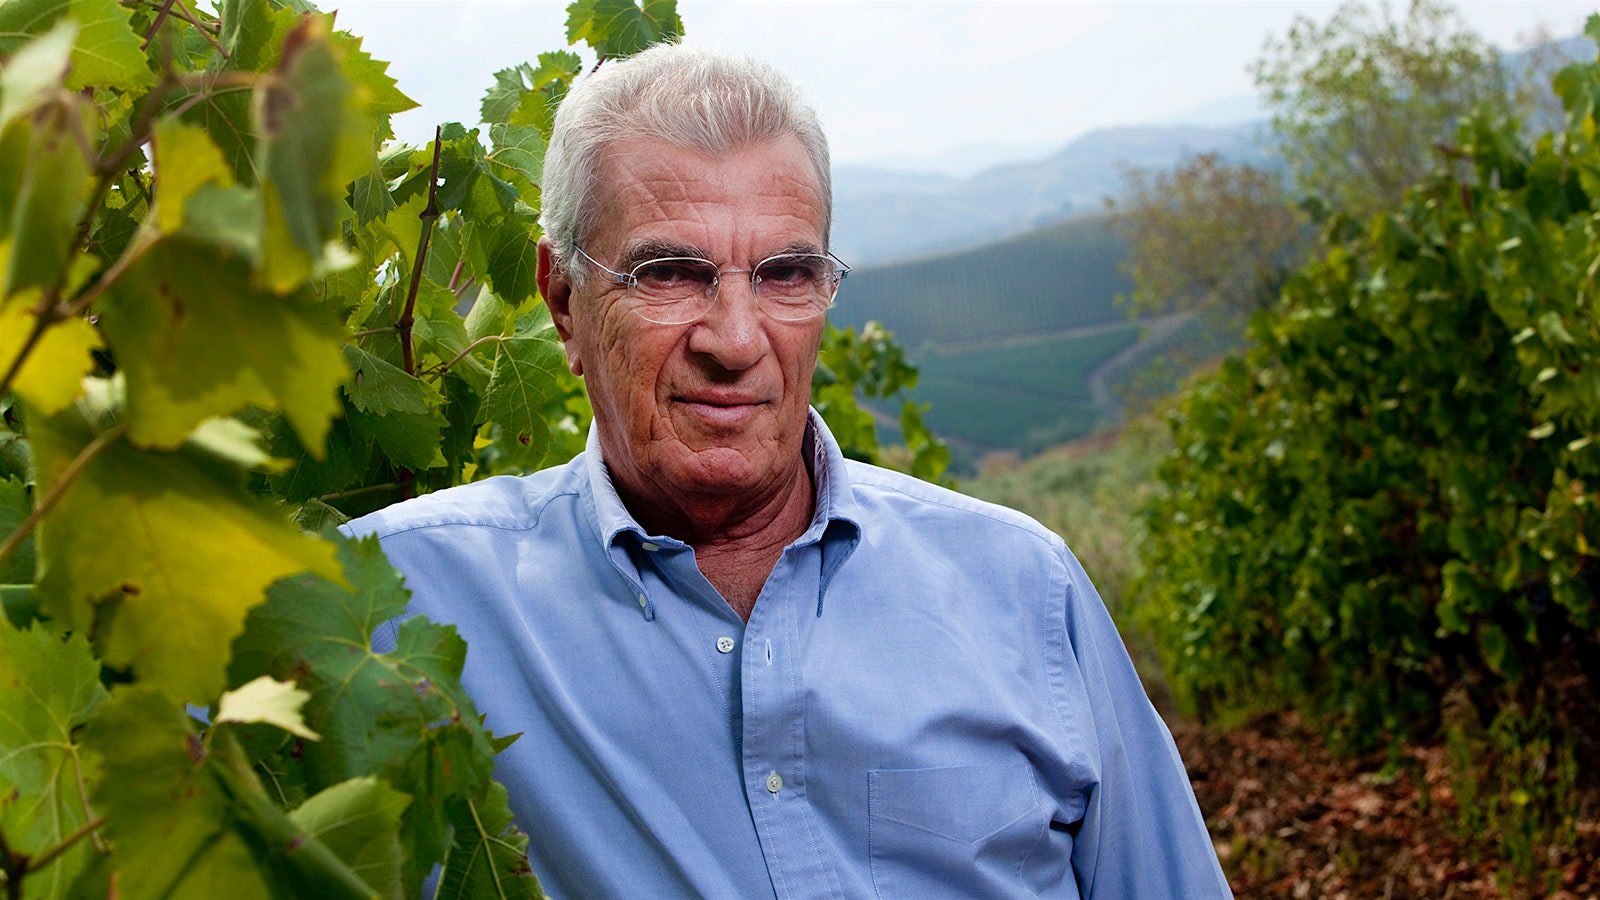  Lucio Tasca d'Almerita worked at his family's winery for six decades, expanding not just its sales but also the world's perception of Sicilian wine.